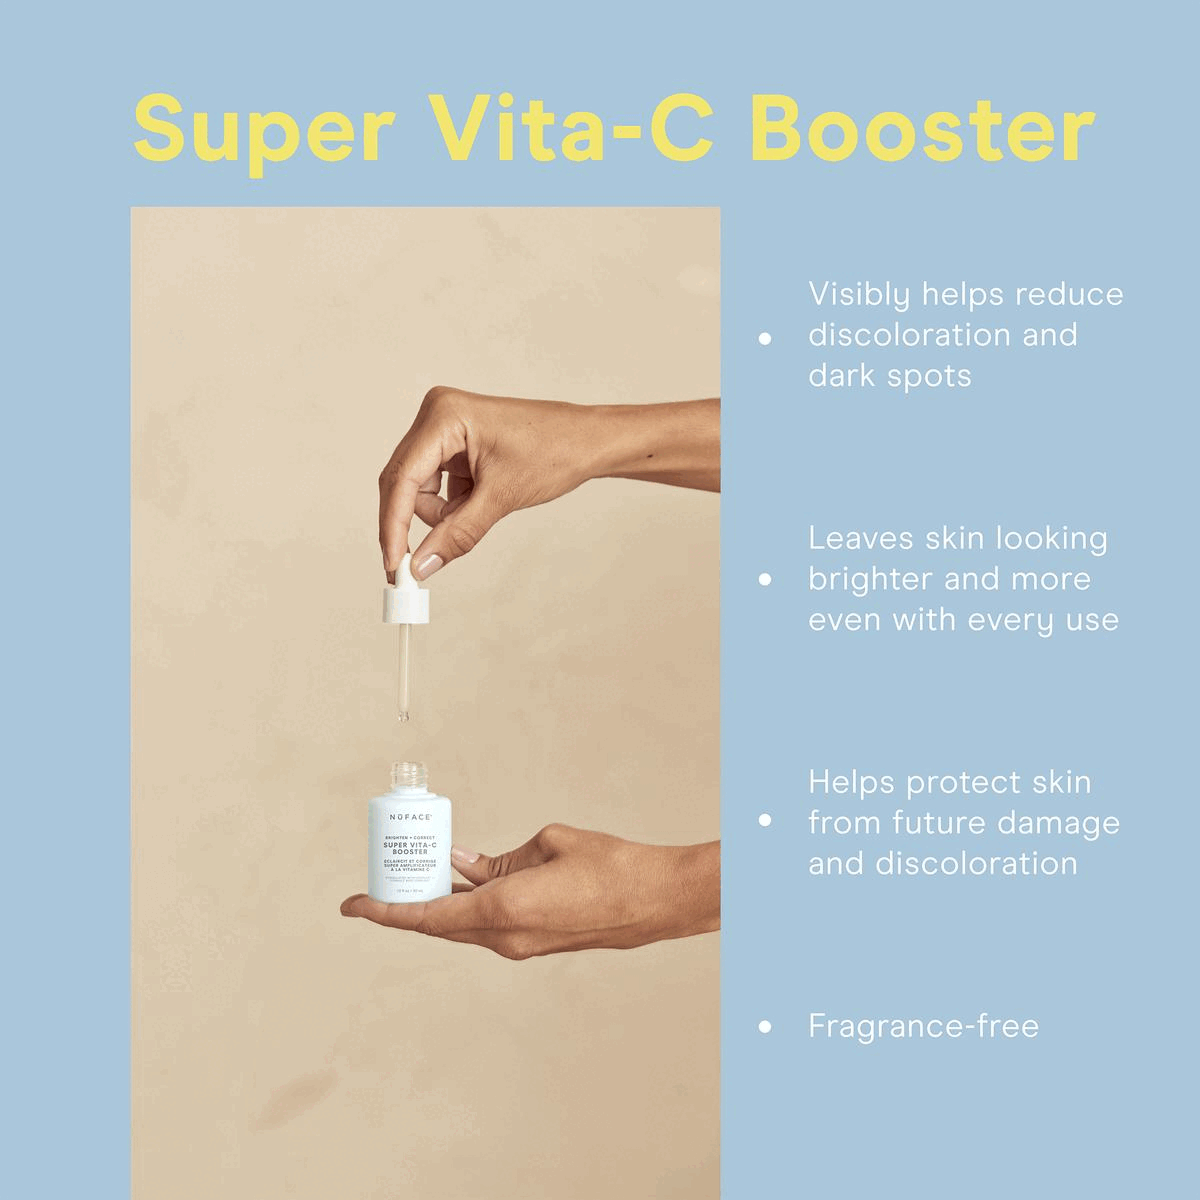 Benefits of Super Vita-C Booster Serum. Ingredients and their Benefits of Super Vita-C Booster Serum. Steps on how to use the product. Comparison chart of different boosters